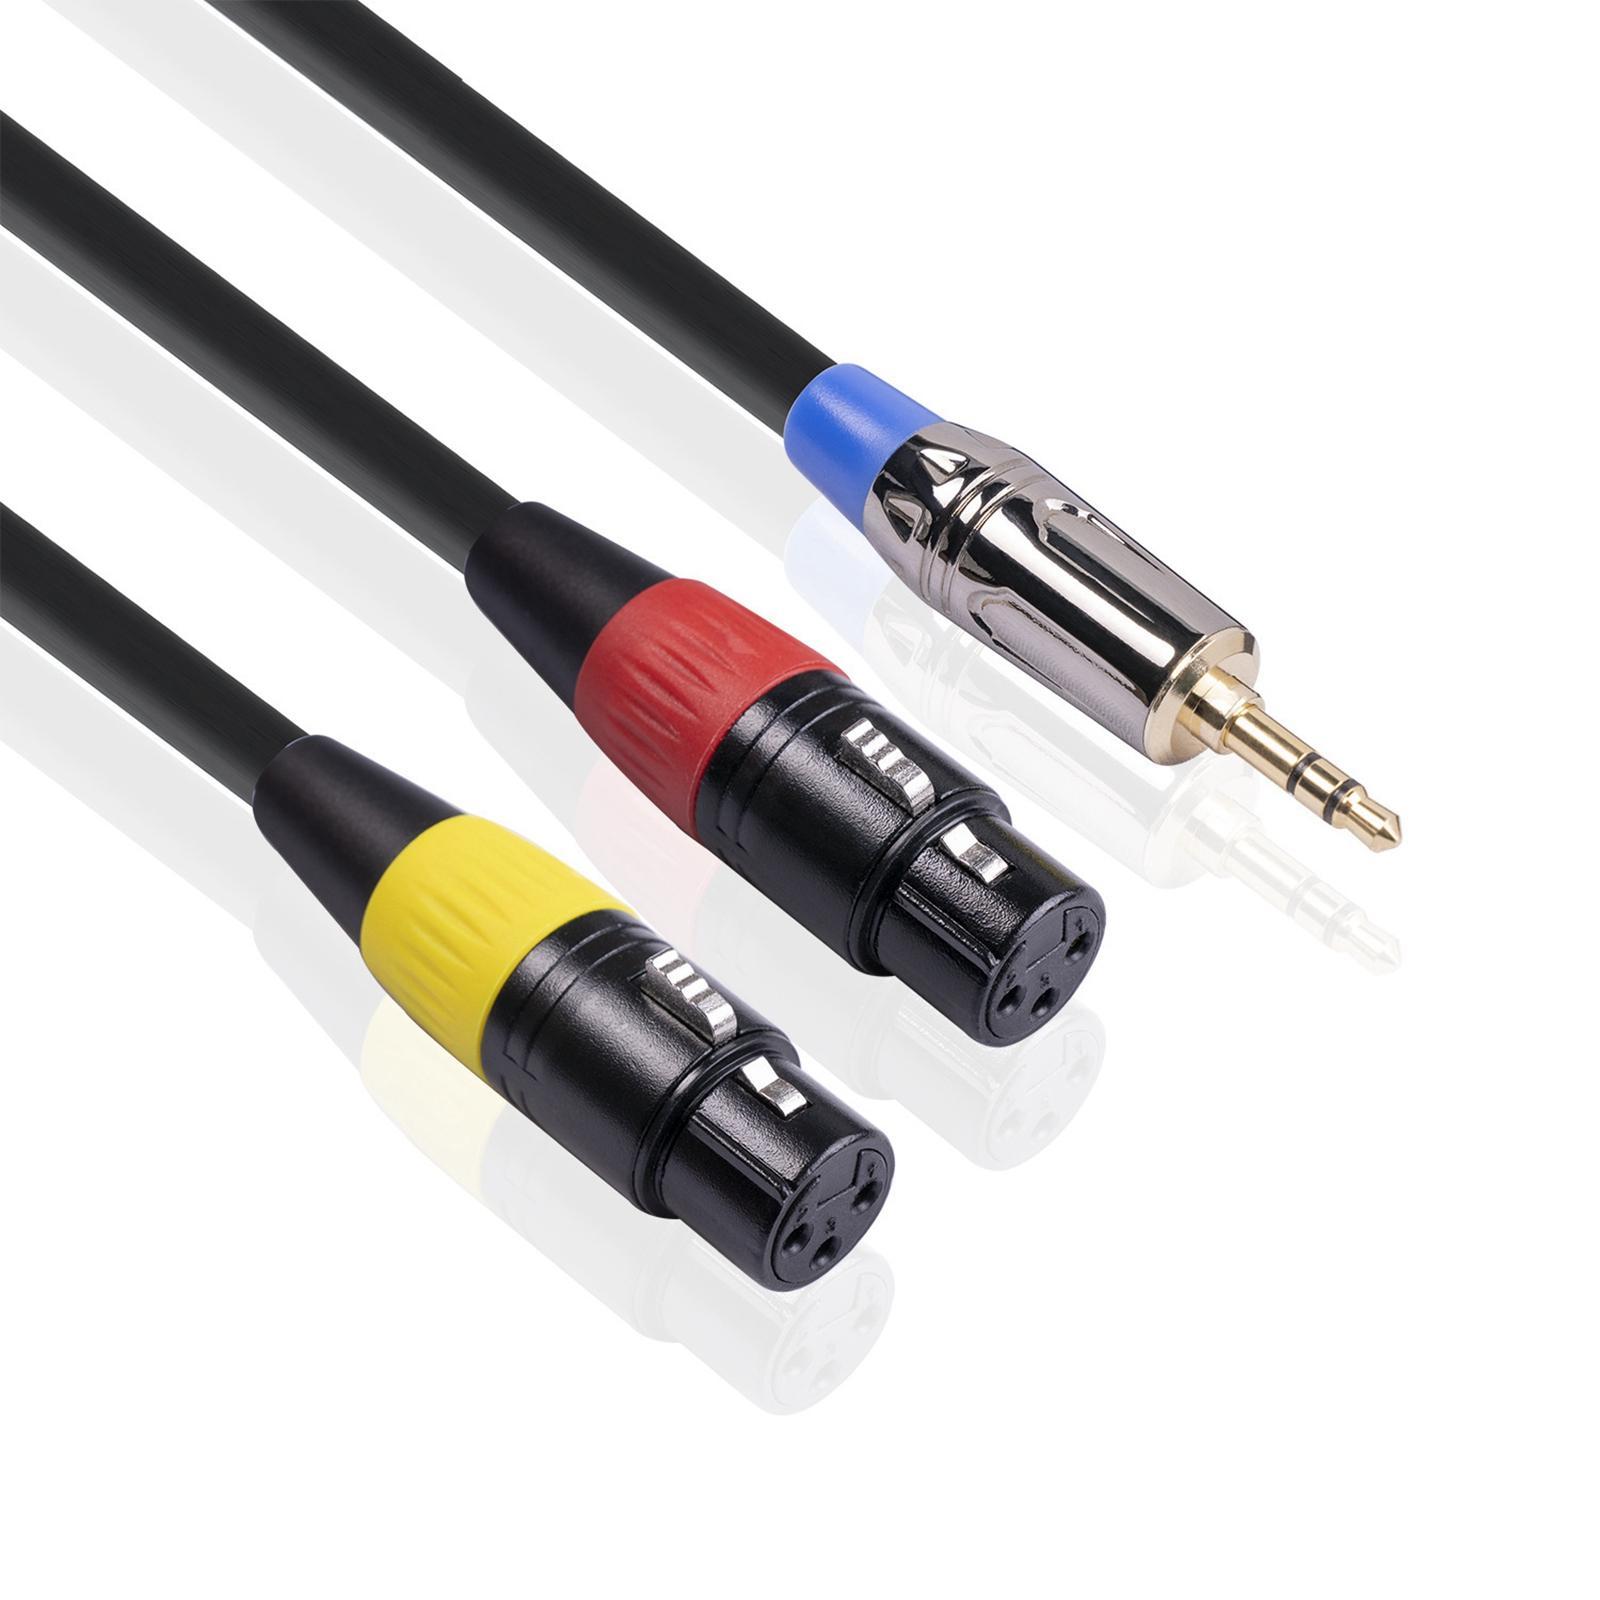 1PC Dual XLR to 3.5mm Stereo Cable Dual Female Audio Cable Jack Male to 2 XLR Female